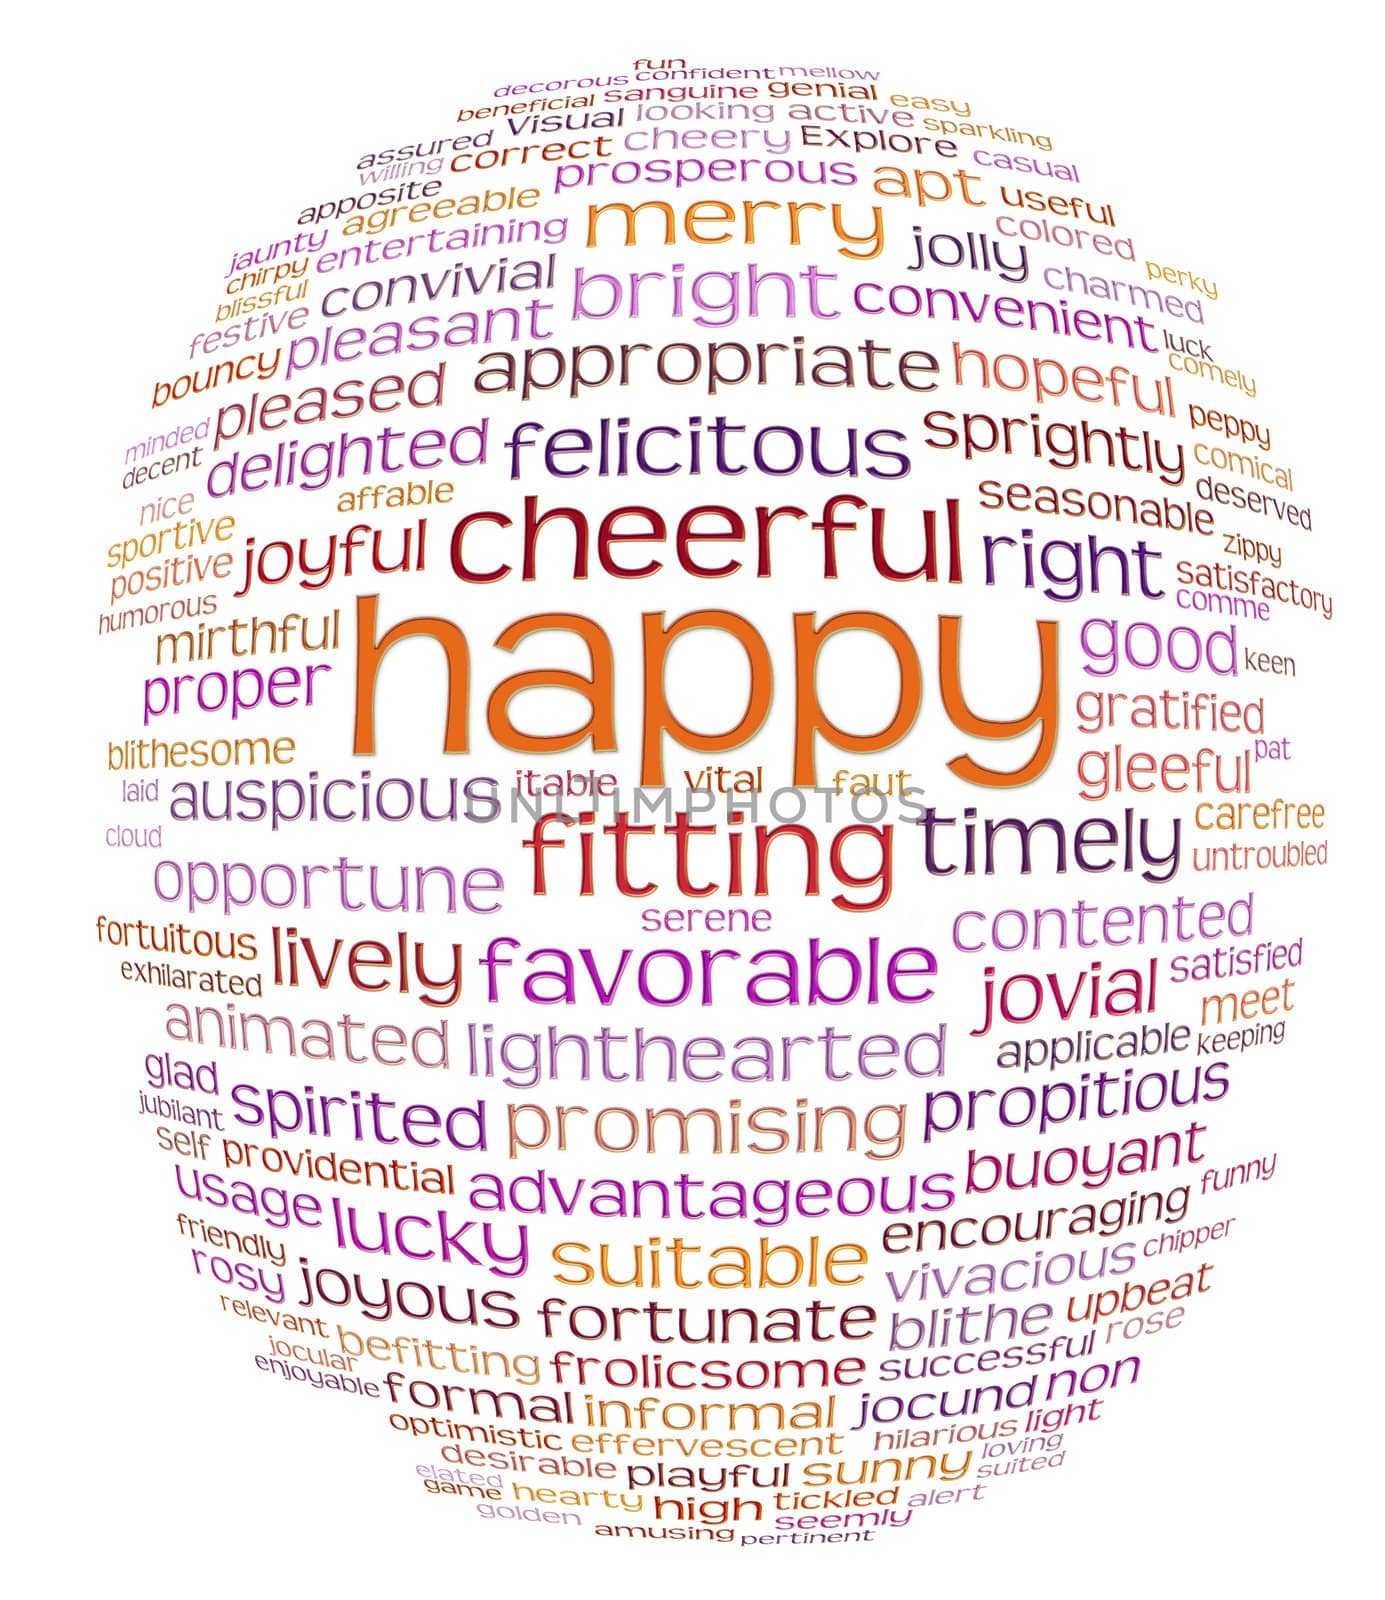 happy cheerful word cloud by clearviewstock